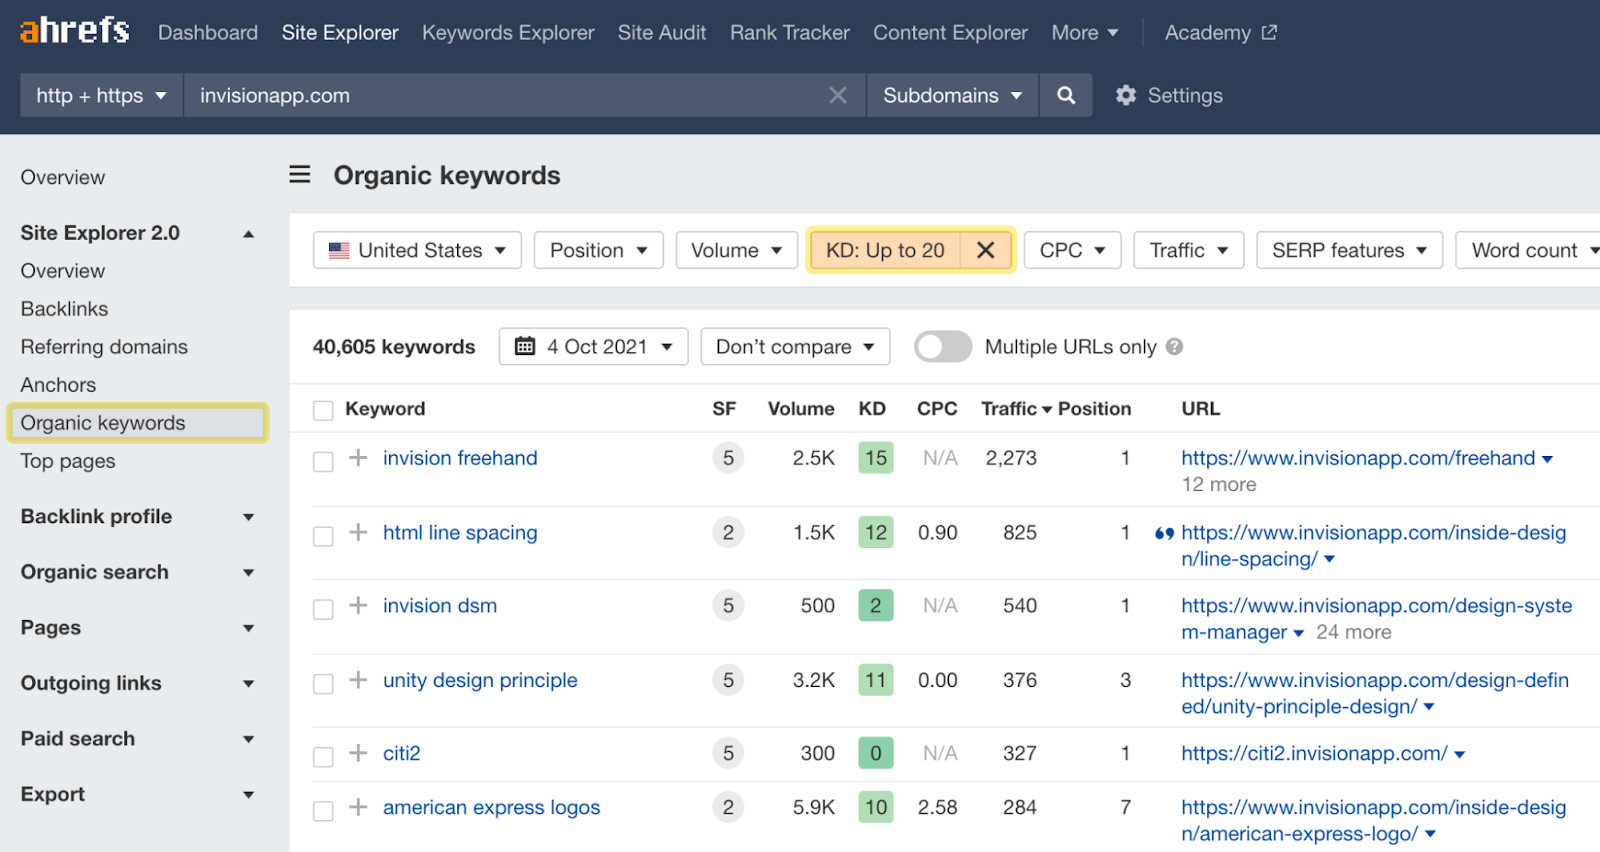 Organic keywords report results for Invision's website